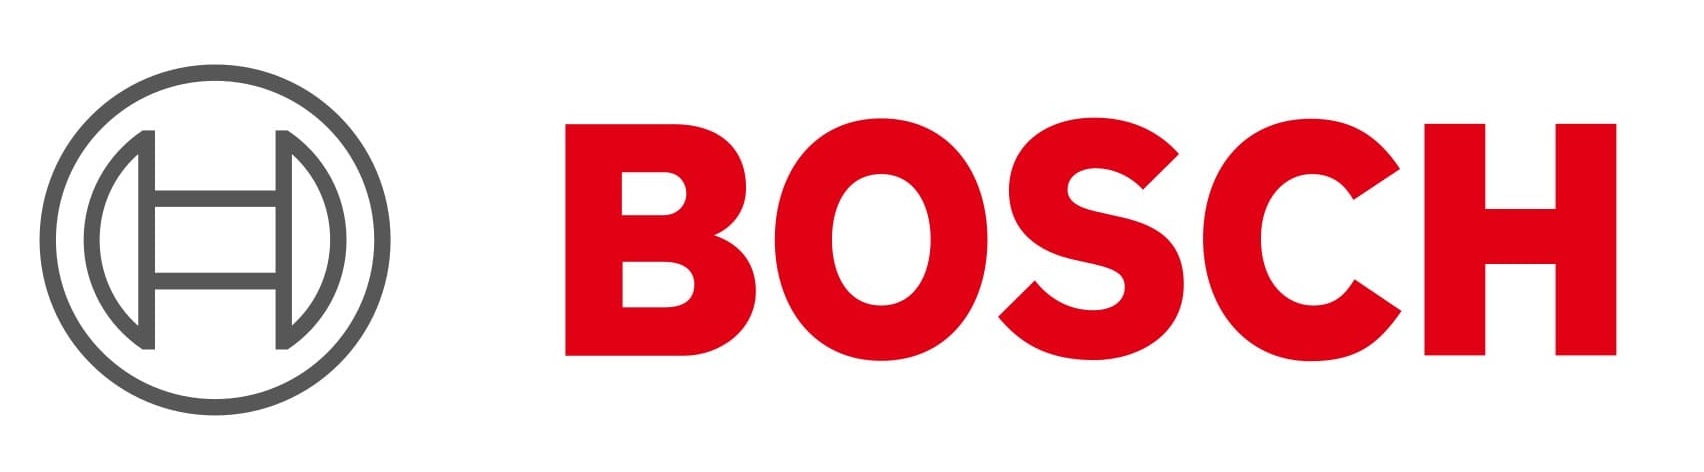 BOSCH Fix My Oven, Kenmore Oven Fix Near Me